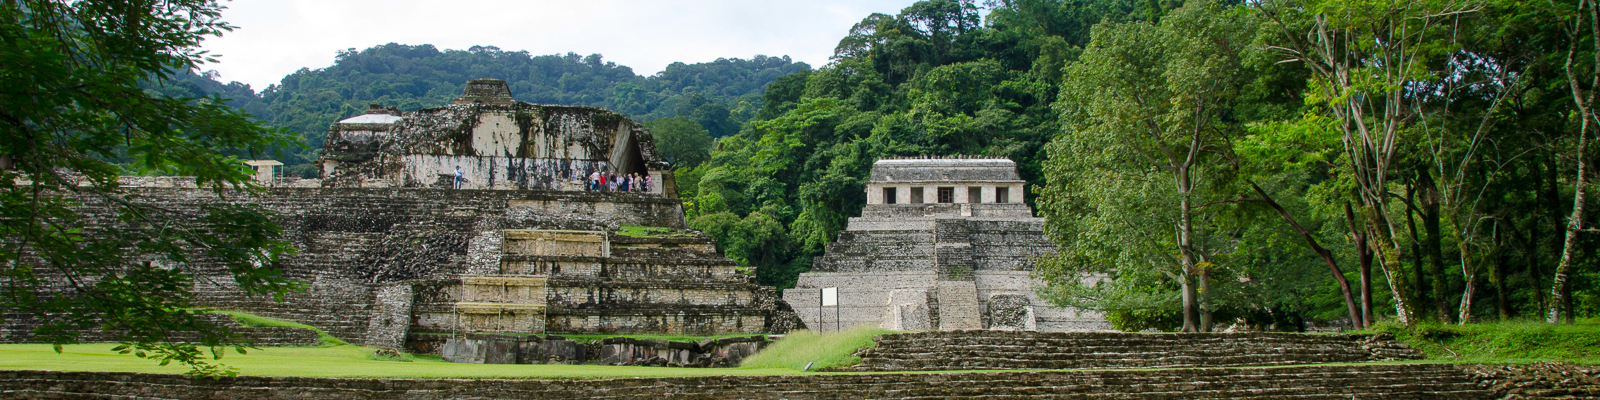 History And Archaeology Luxury Travel Vacation Tours